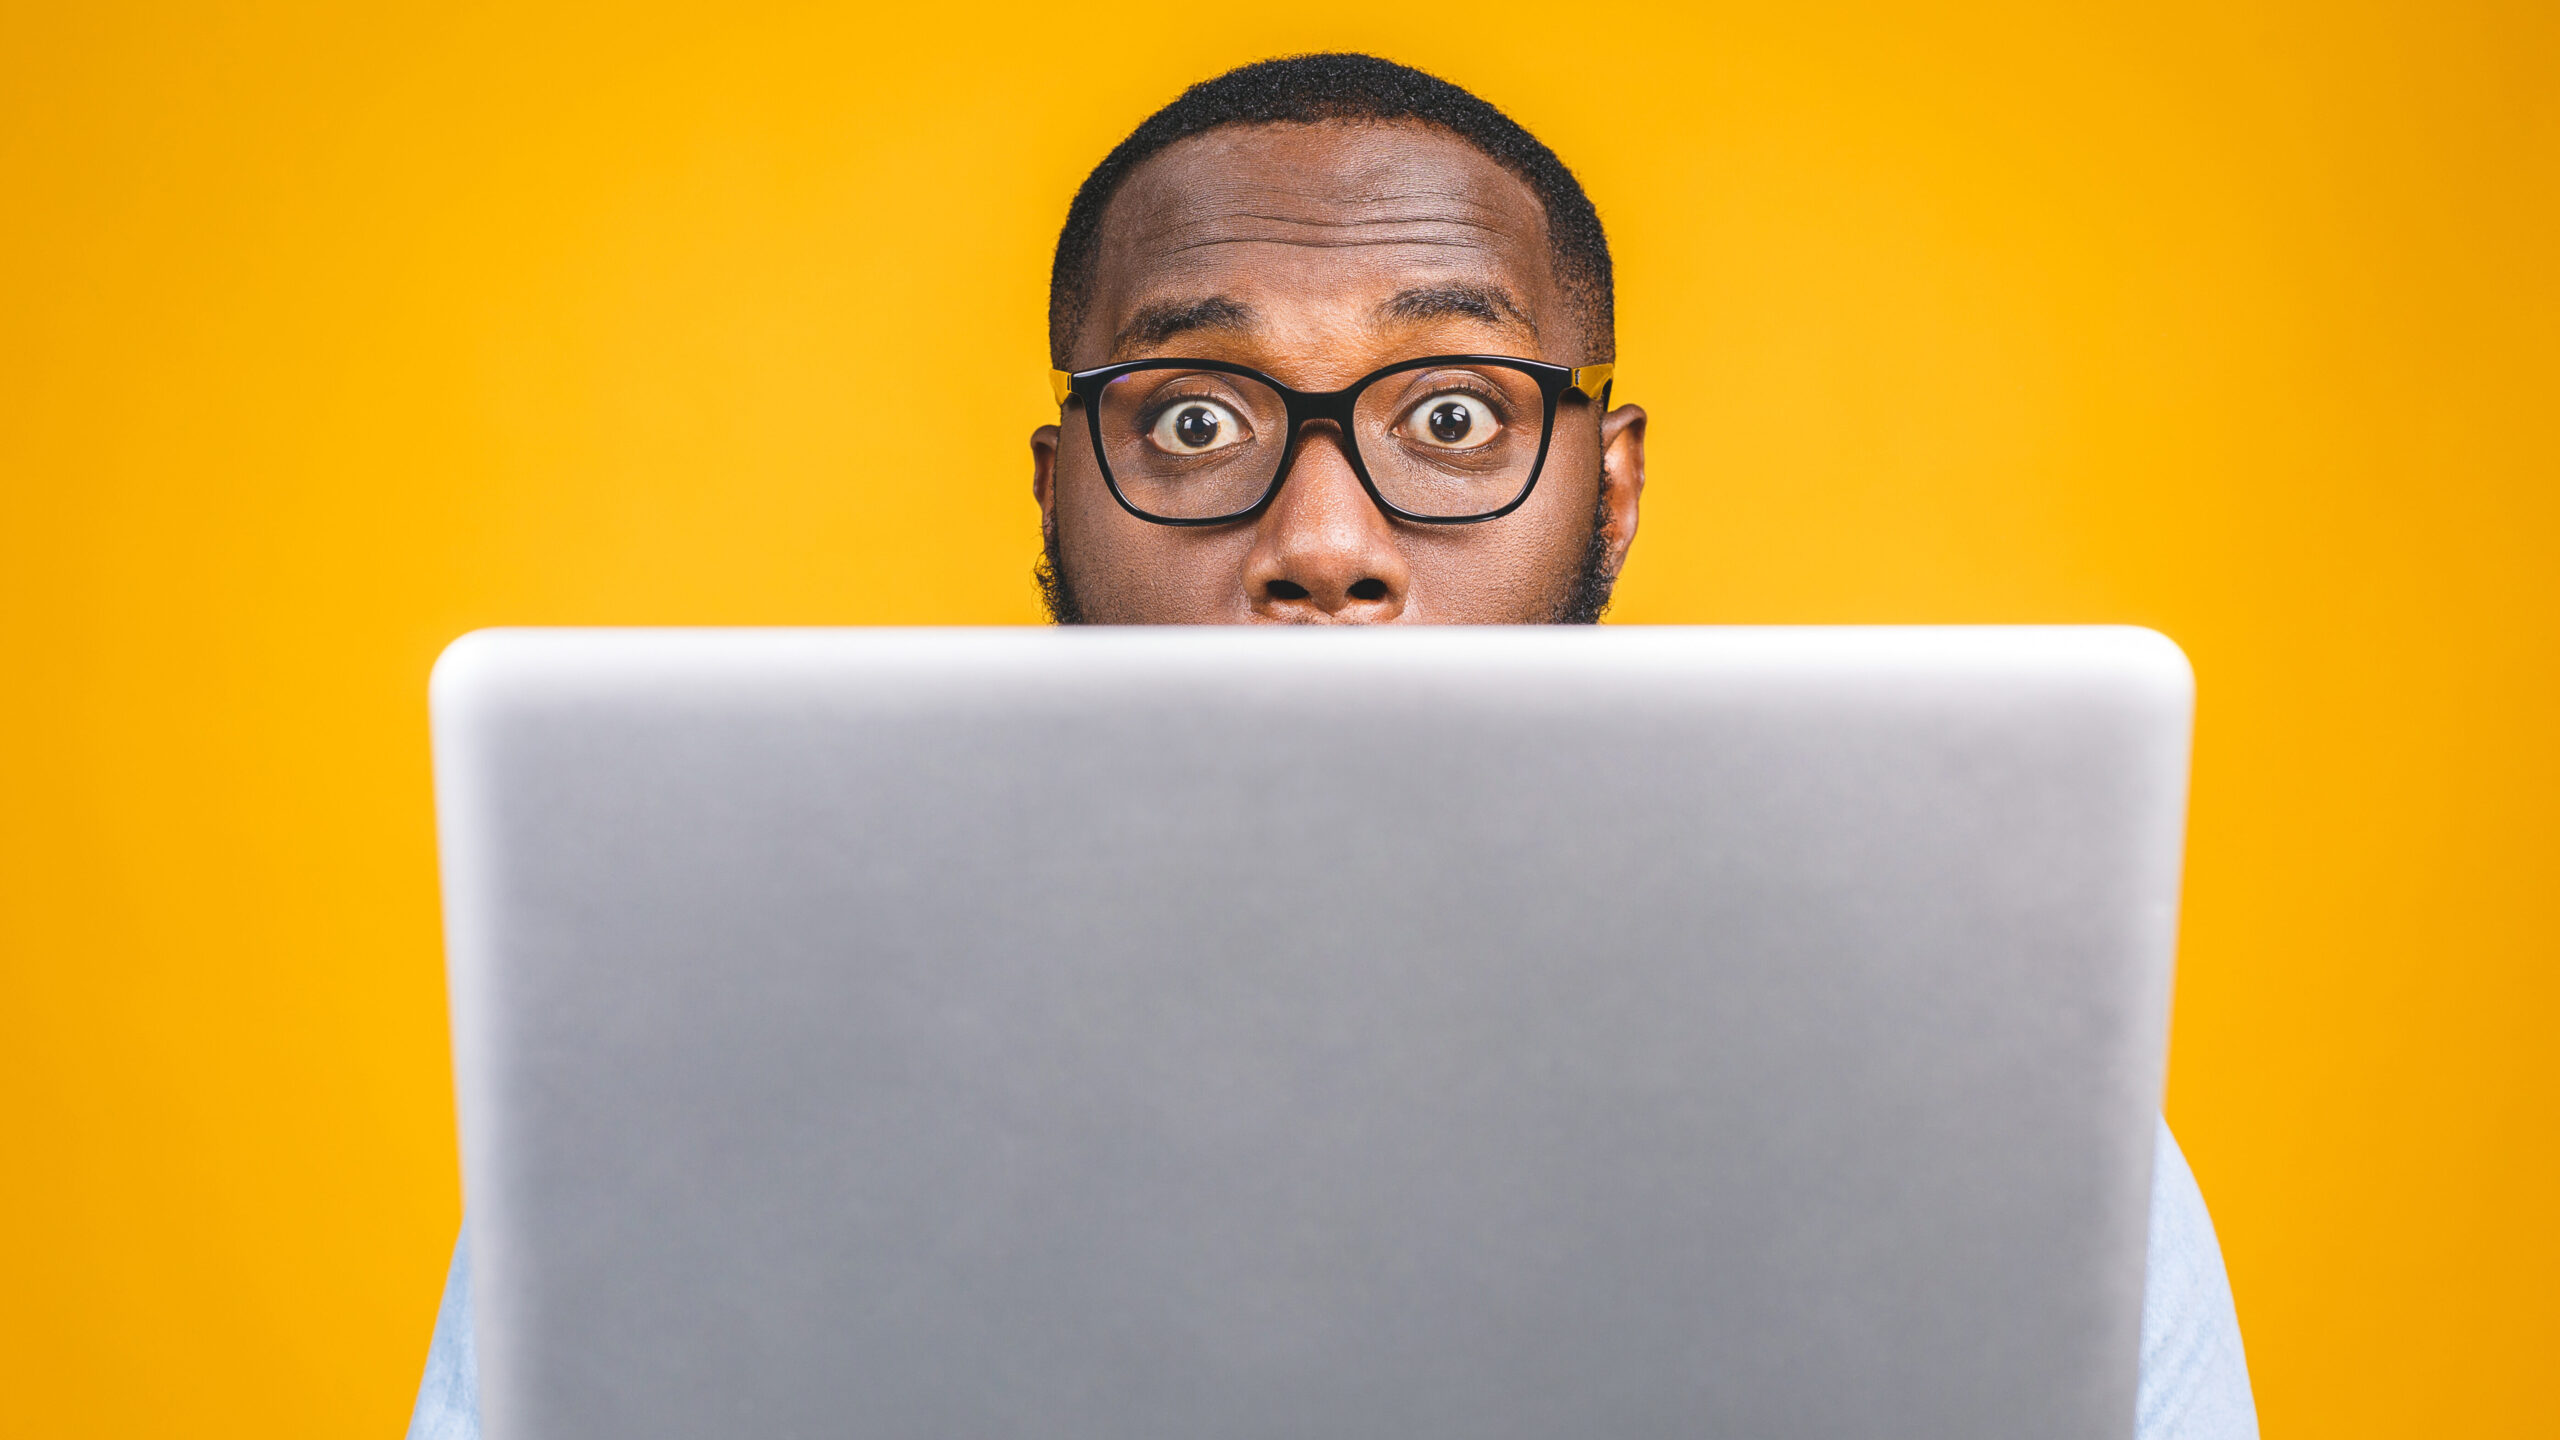 Young surprised african american man standing and using laptop computer isolated over yellow background.